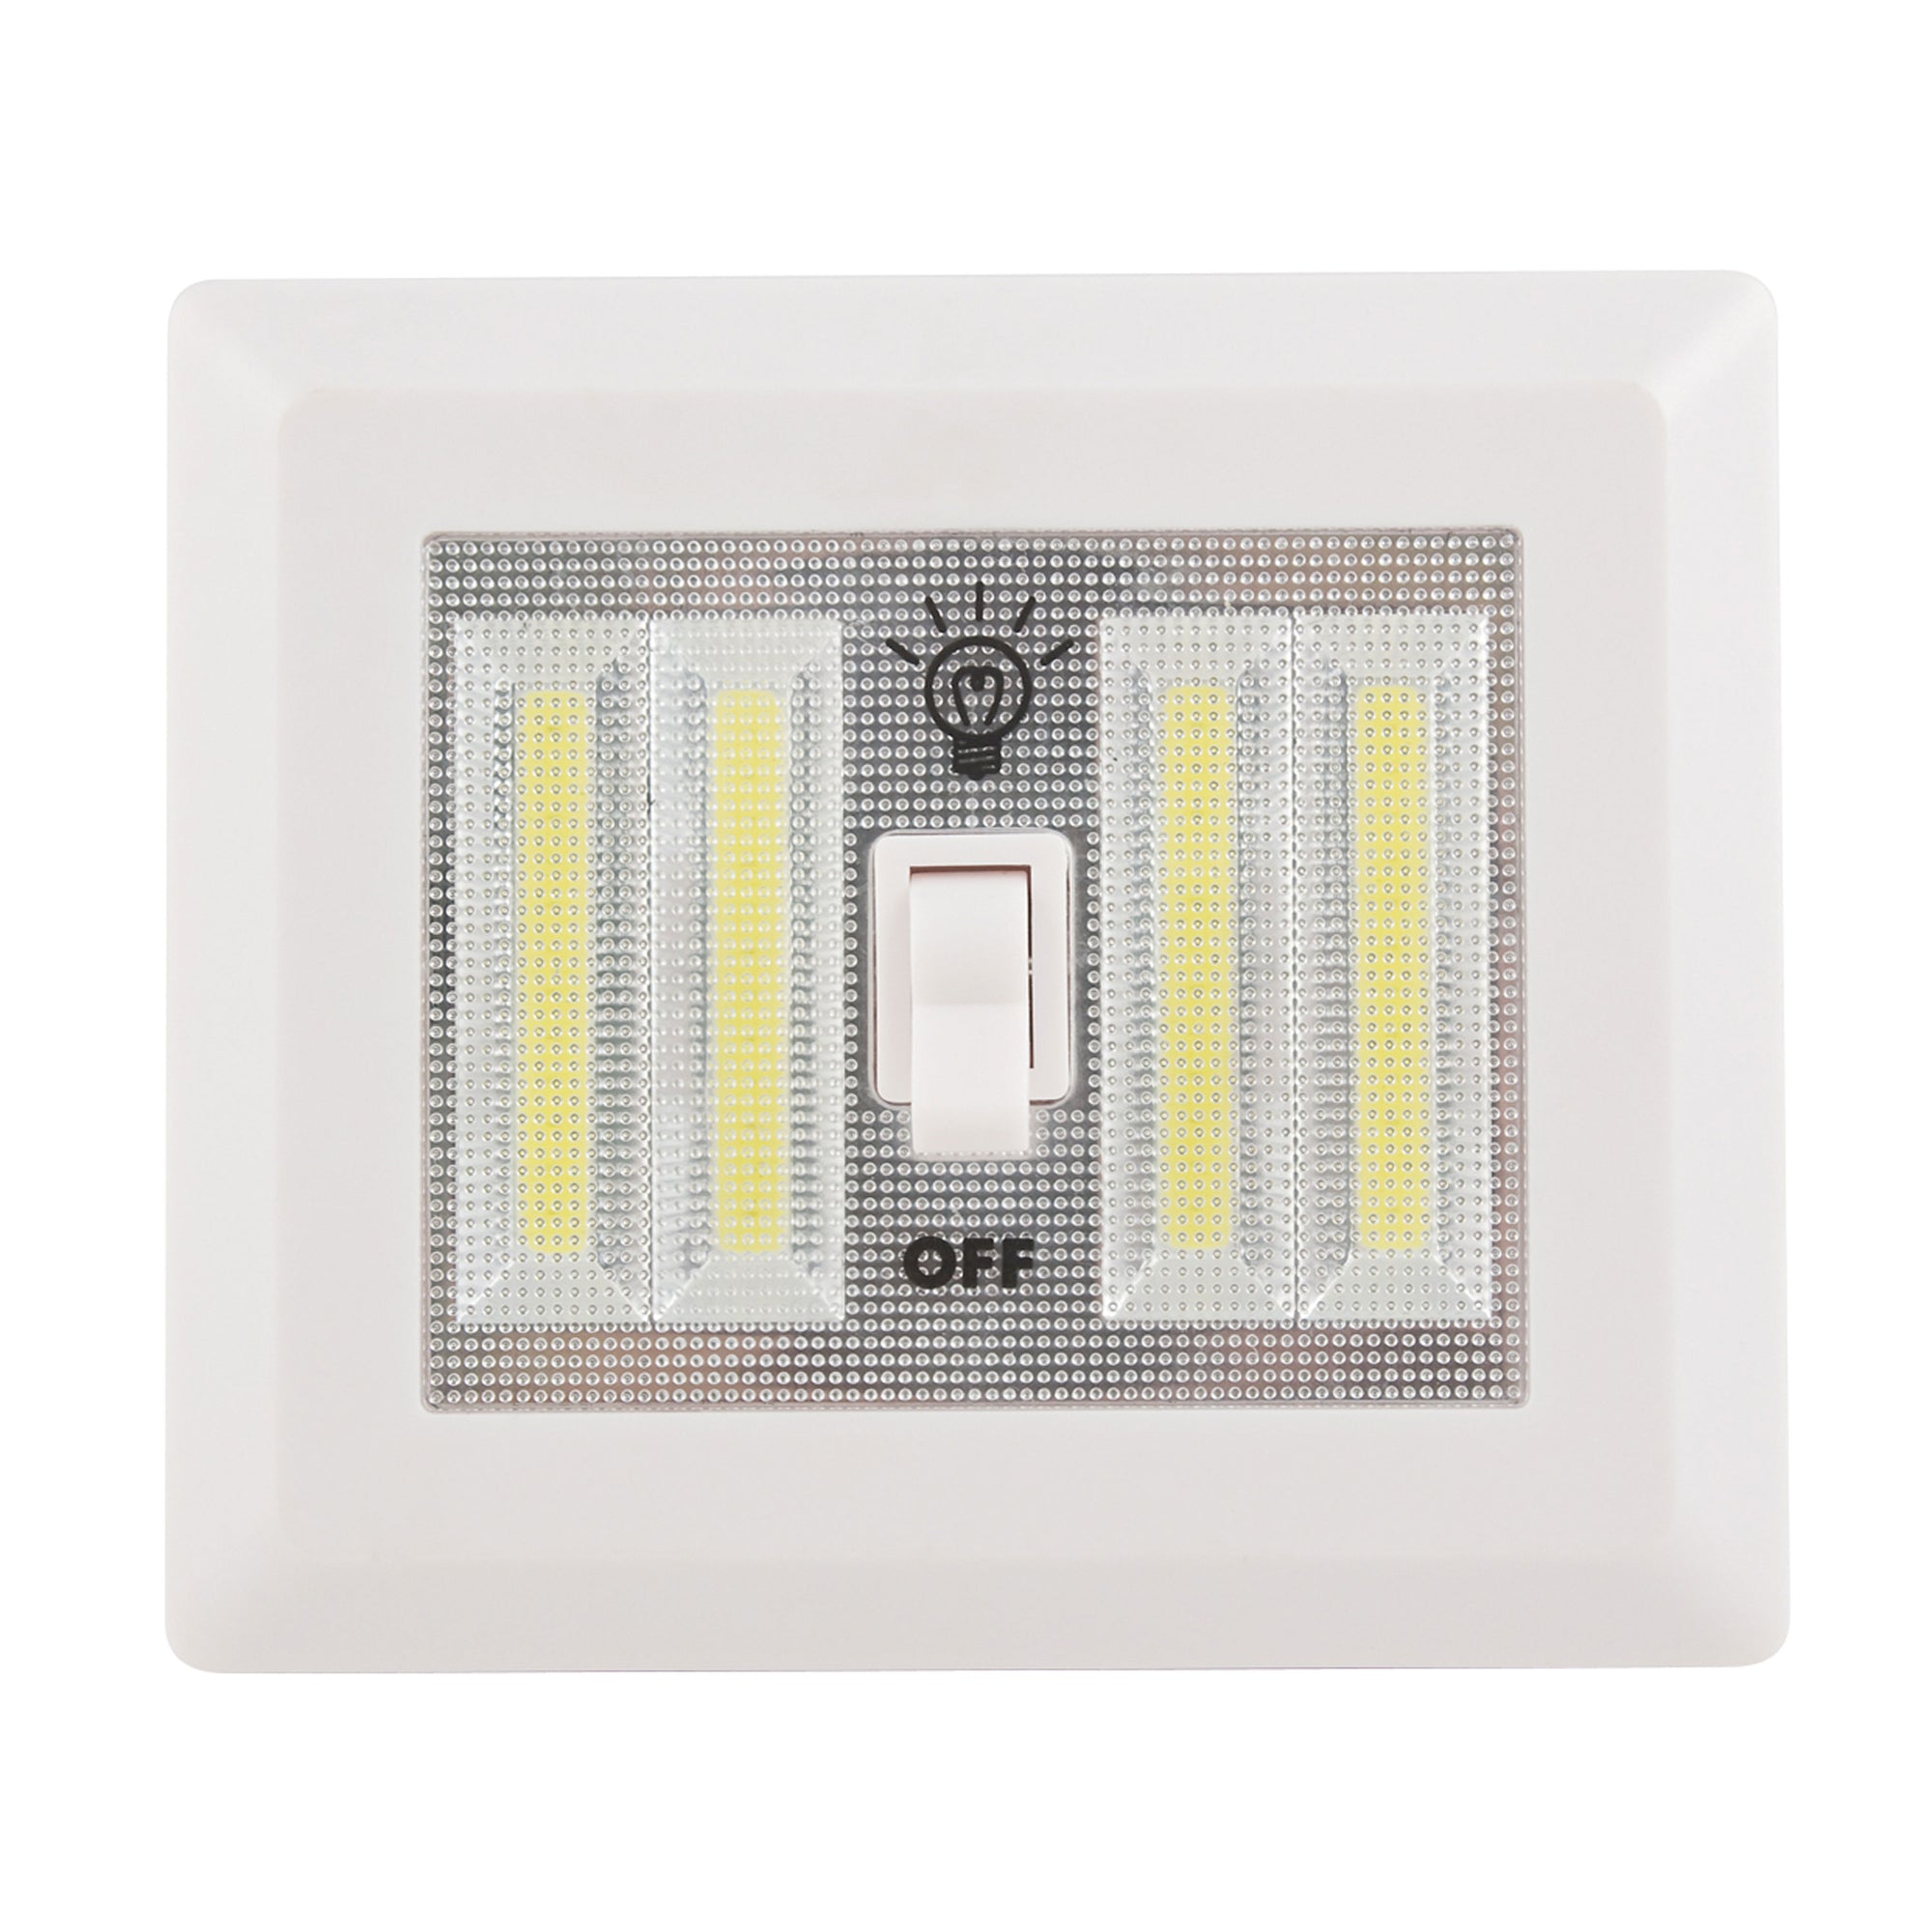 AP Products 025-040 Glow Max Cordless Light Switch - 400 Lumens